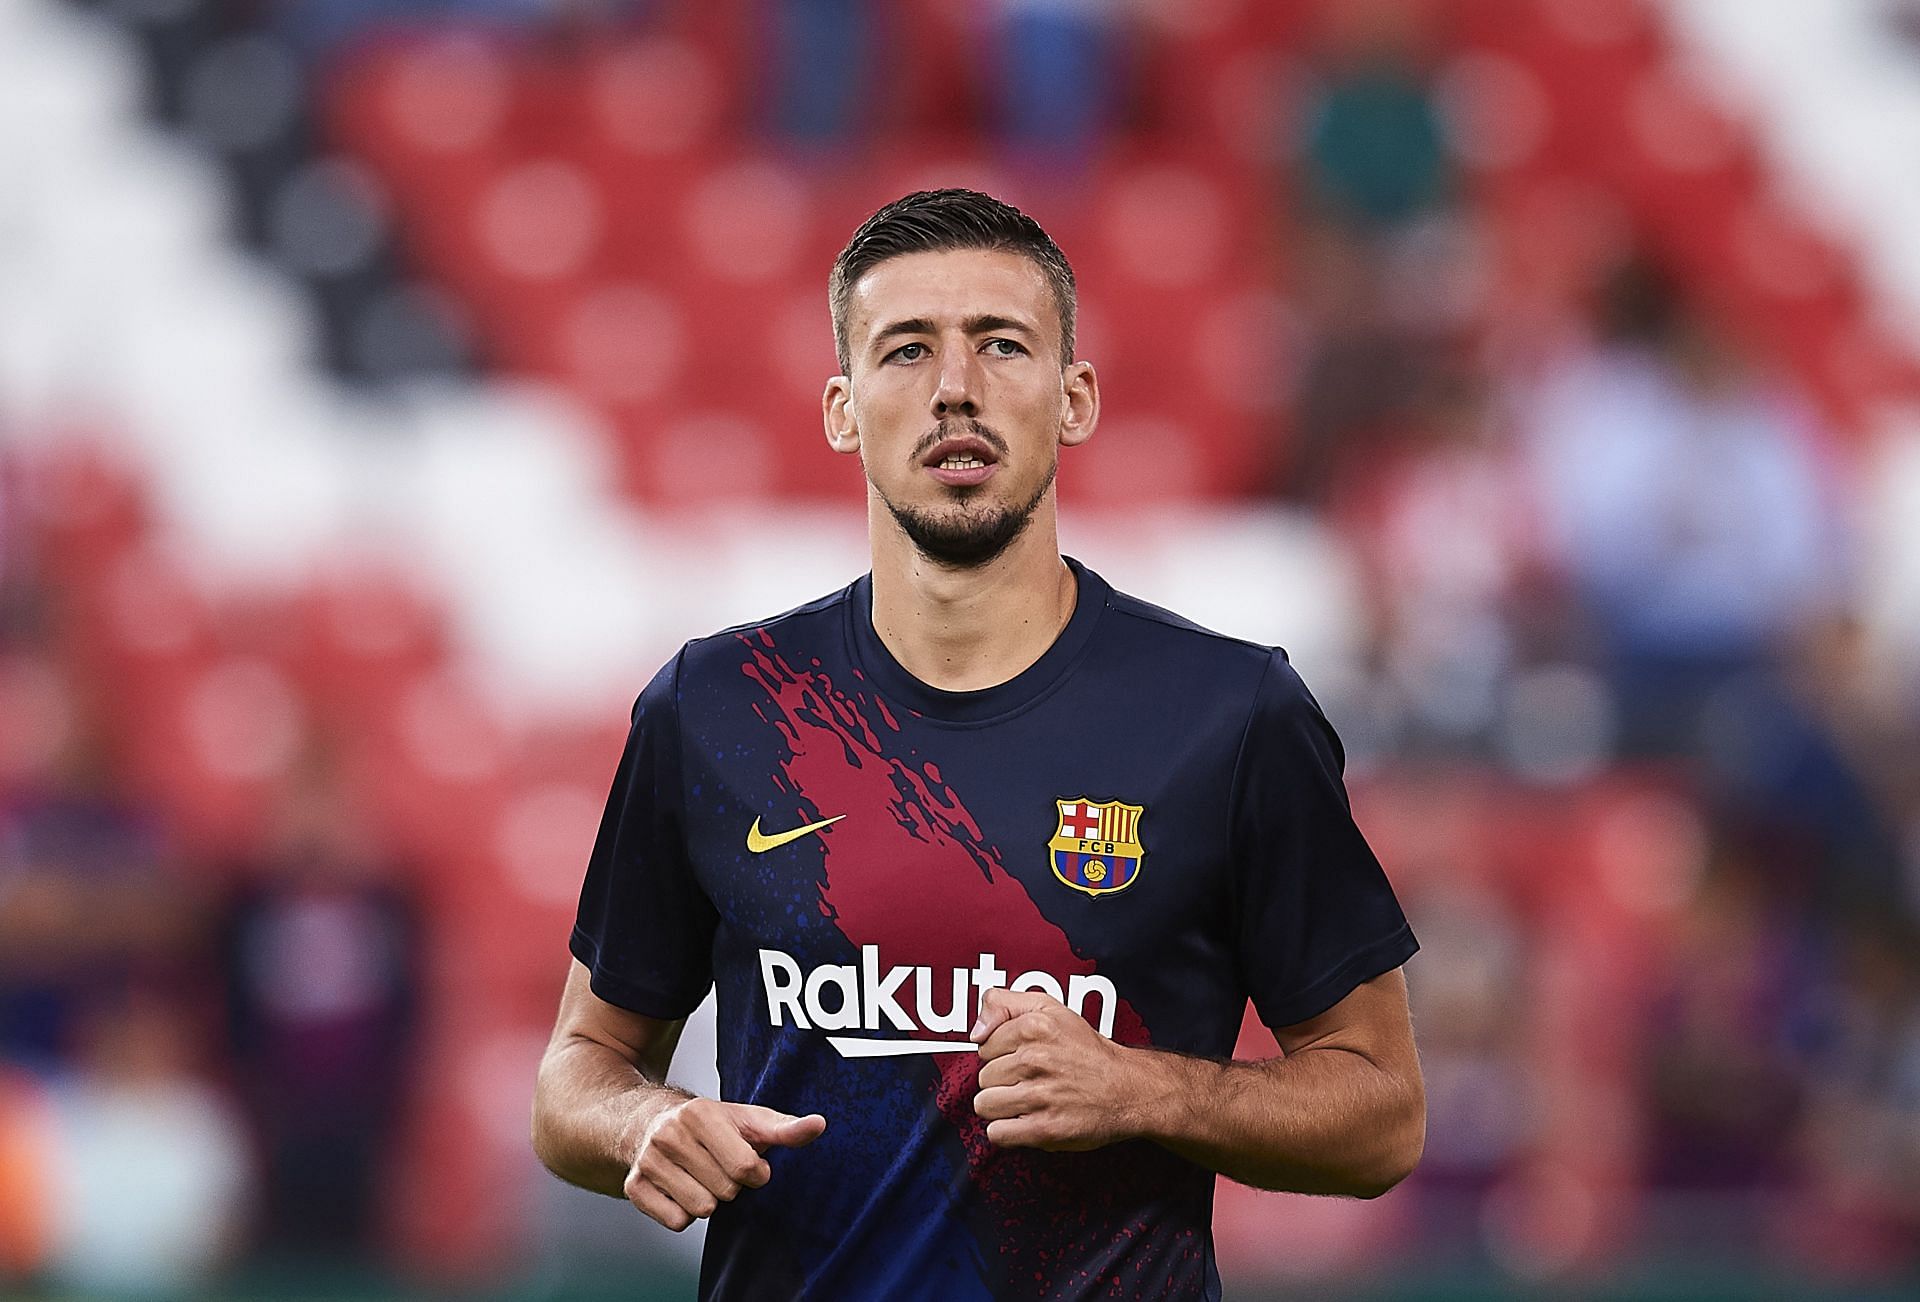 Lenglet has played just 185 minutes for Barcelona this season